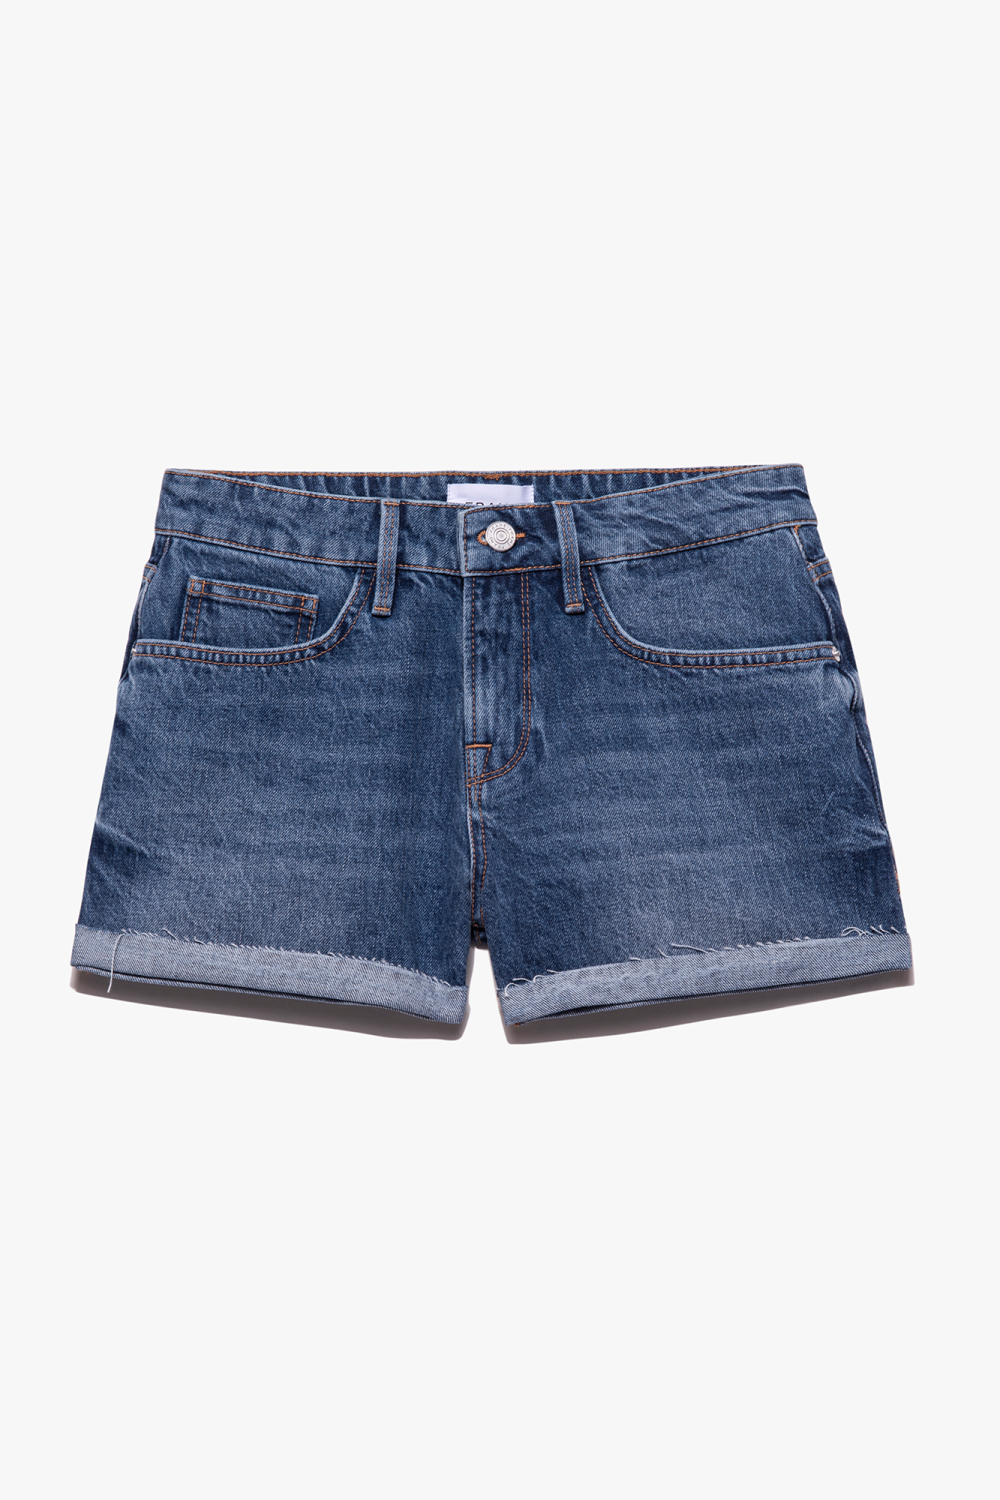 The Le Grand Garcon Short from Frame is a must-have piece for any wardrobe. Crafted with an ultra-soft cotton blend and a mid-rise waist, these shorts provide maximum comfort and style. 